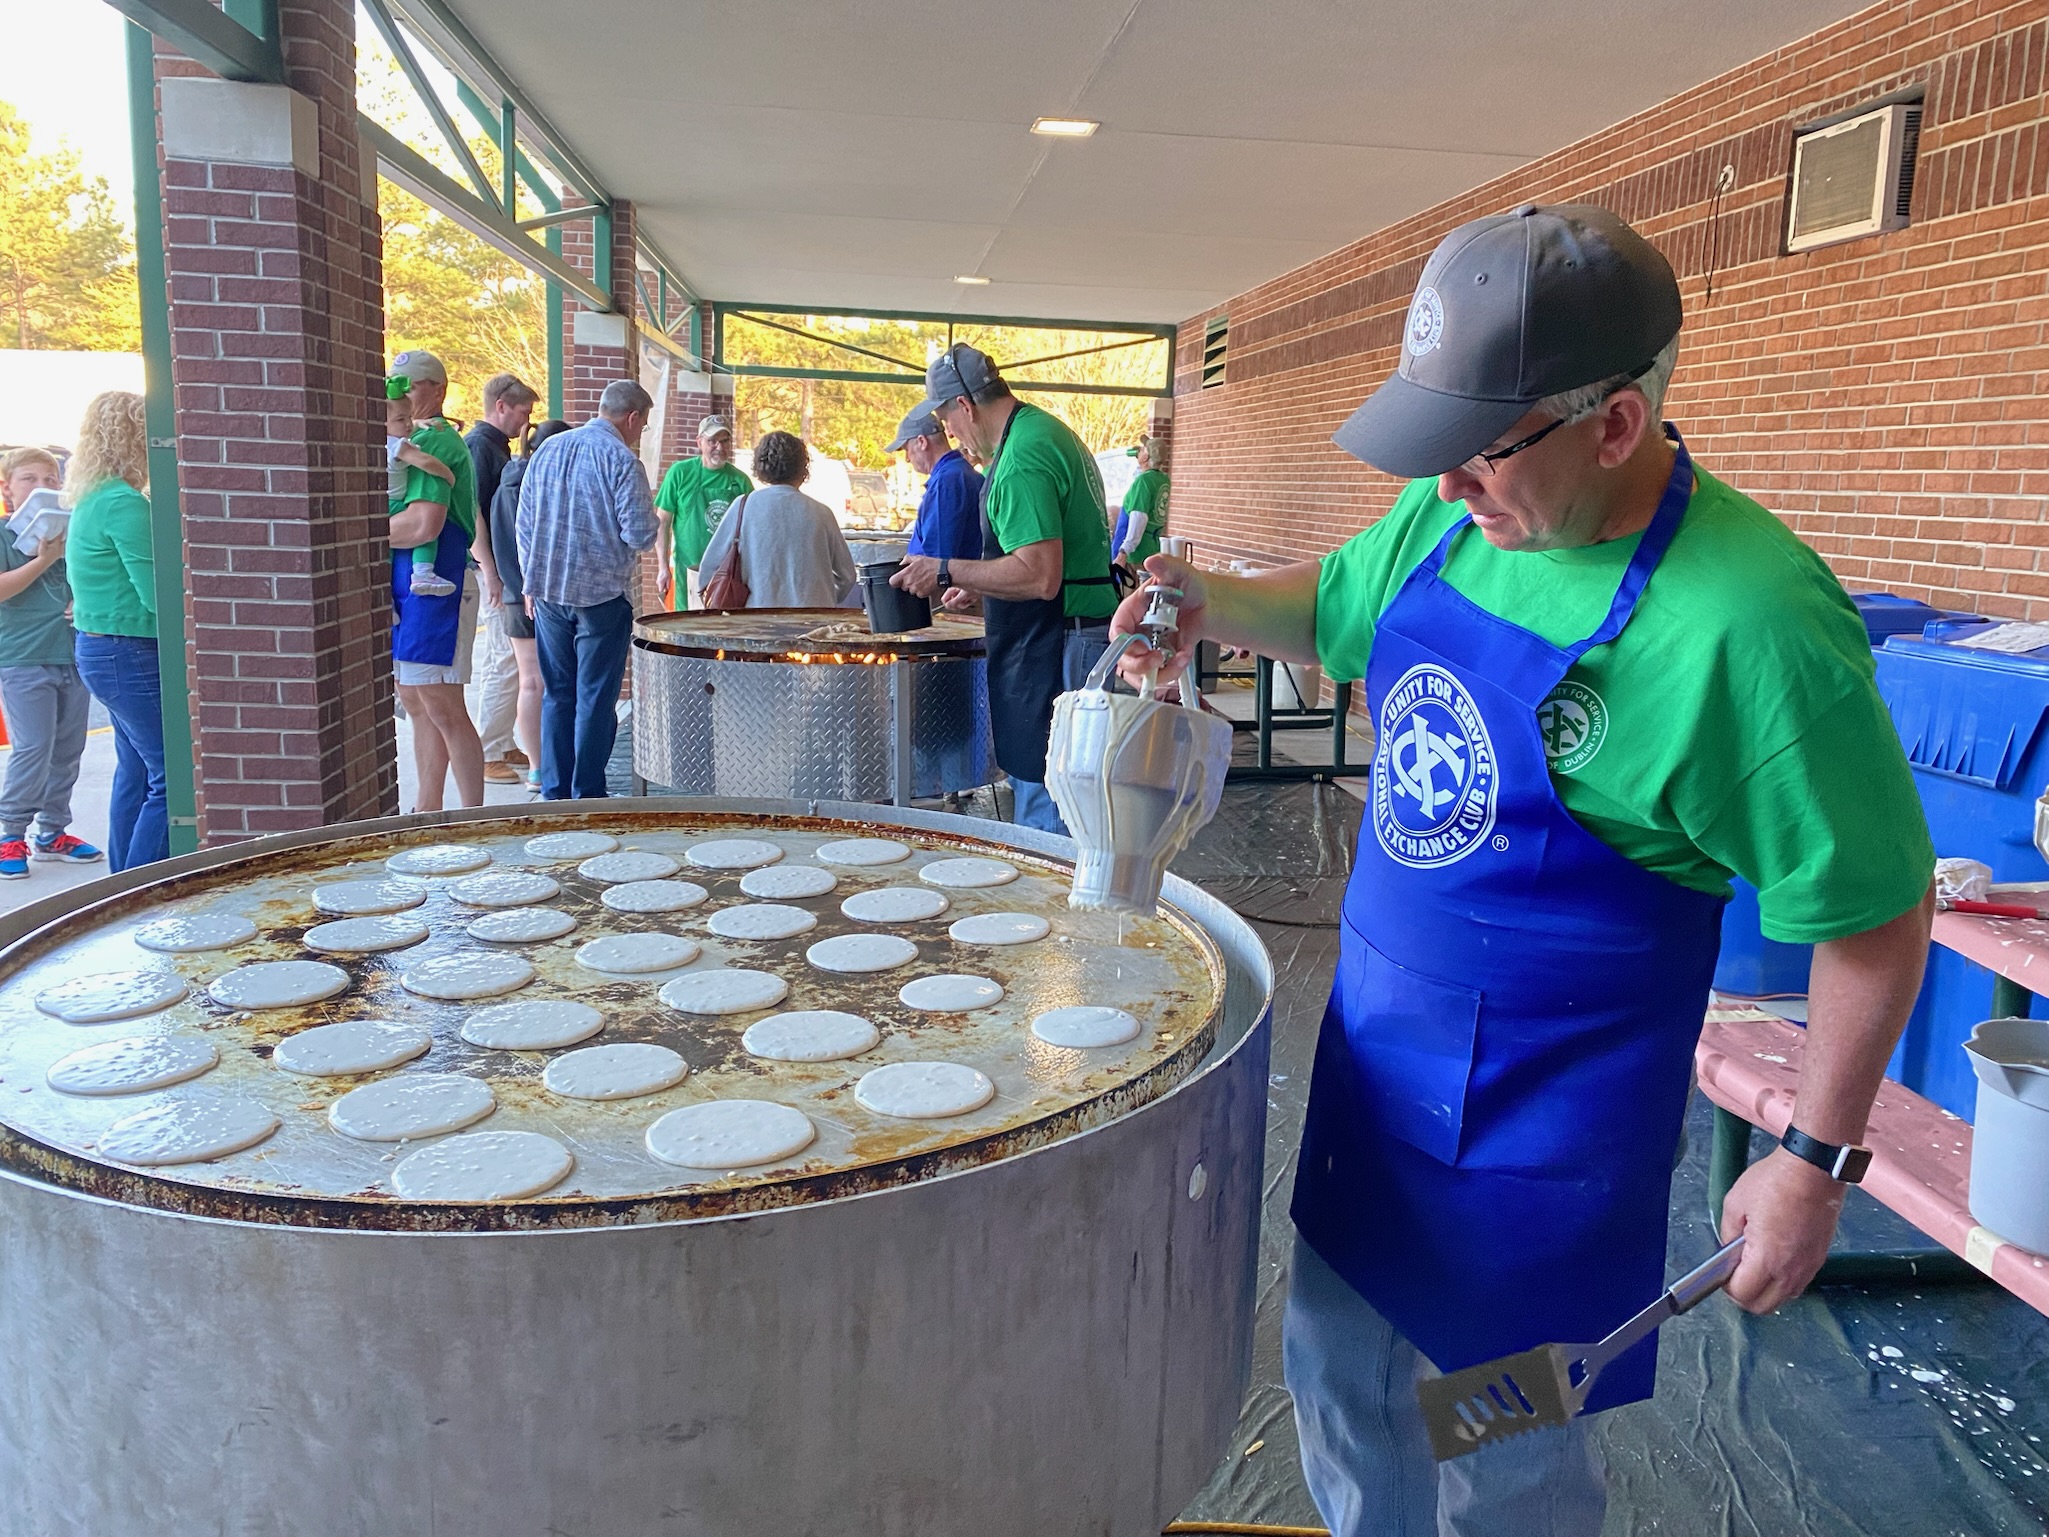 Pancakes being cooked on a giant griddle during the St. Patrick's Pancake Supper.